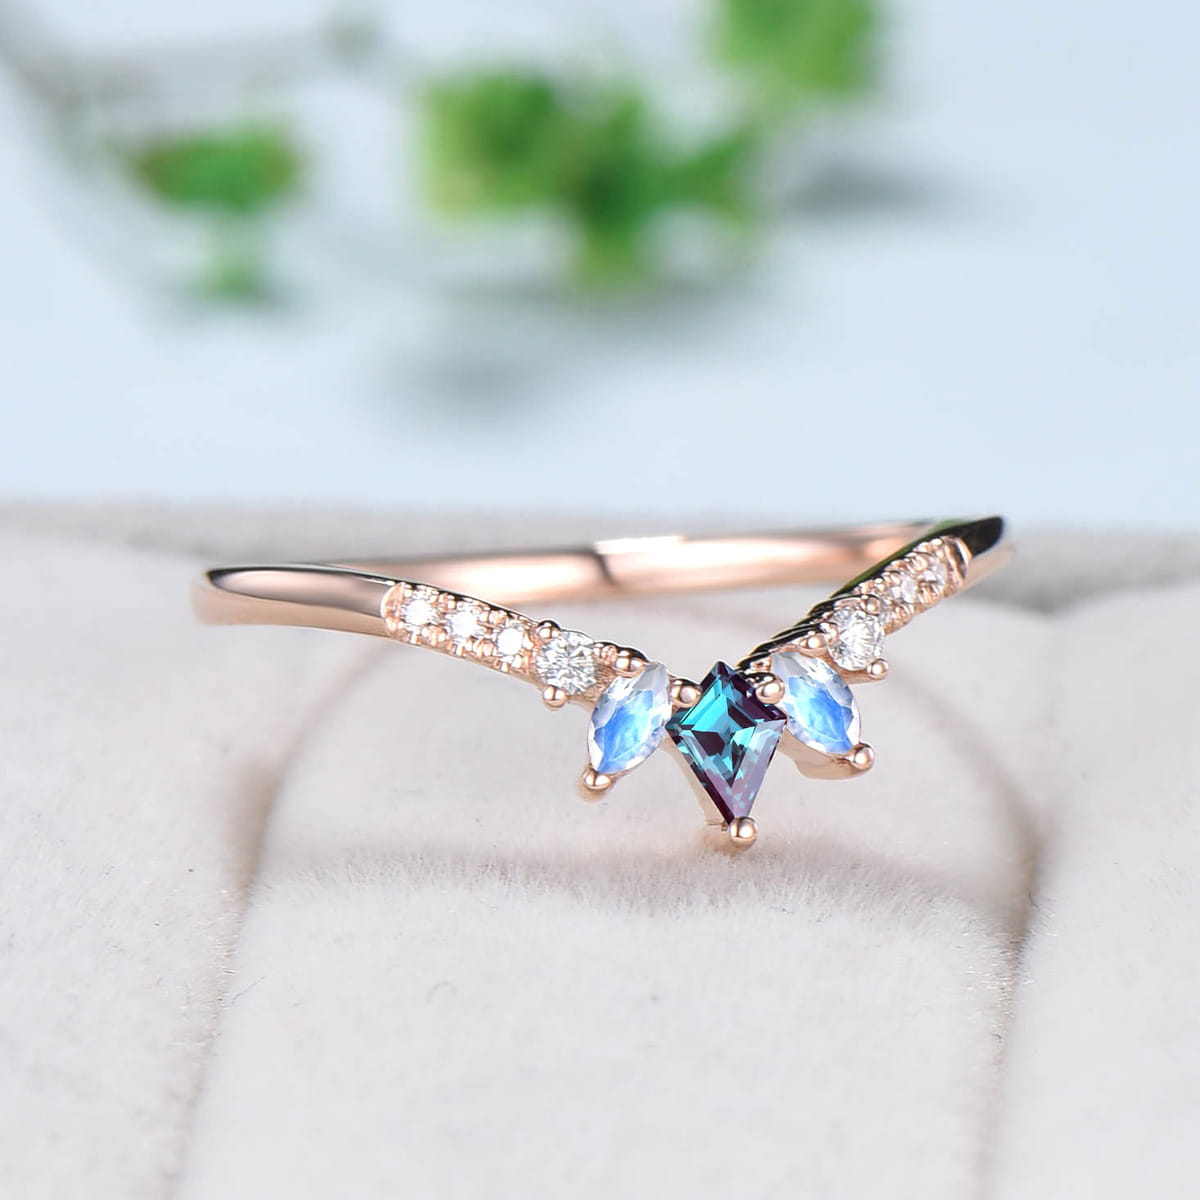 Art Deco Kite Alexandrite Wedding Ring Marquise Moonstone Wedding Band Eternity Moissanite Stacking Ring Women Unique V Curved Band Gift - PENFINE